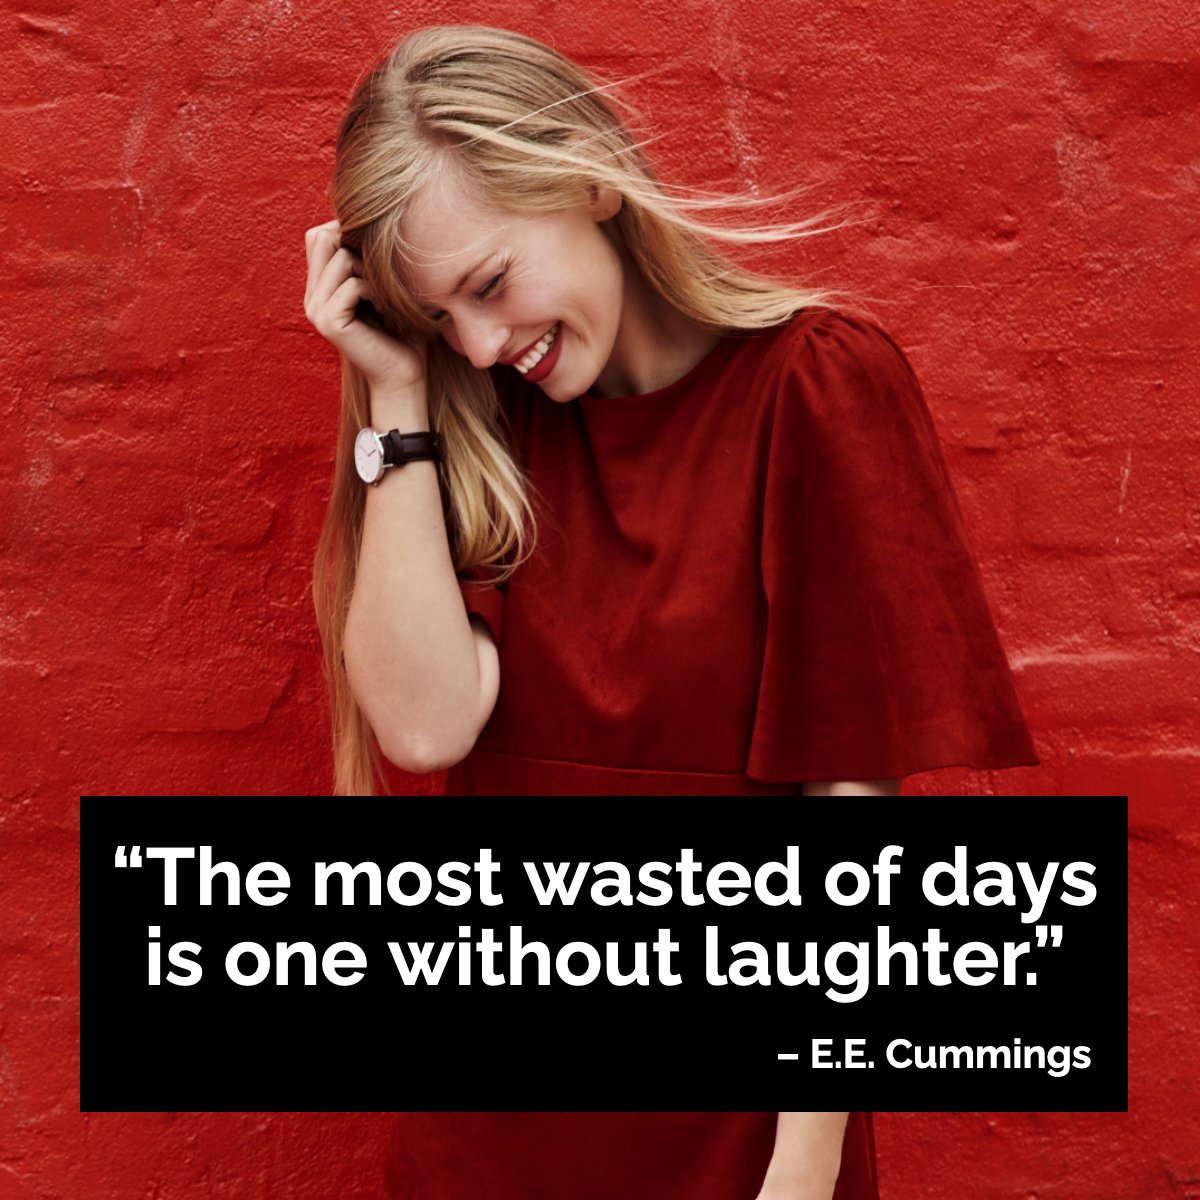 Laughter is one of the most valuable things in your life. 💯

#wisdomquote #wisdomoftheday #quotegram #quoteoftheday  #eecummings